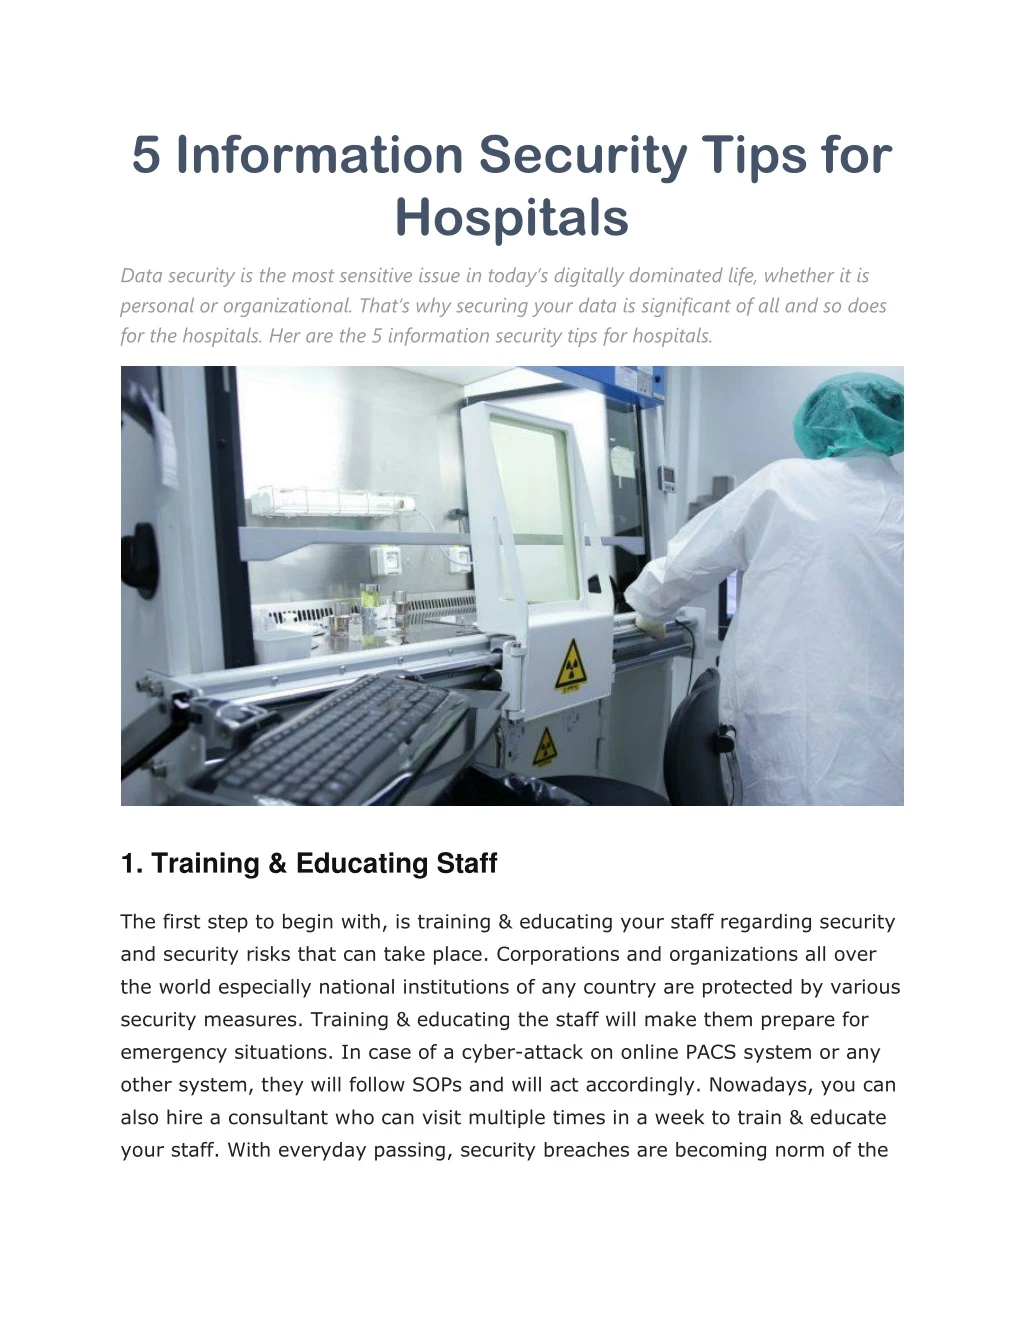 5 information security tips for hospitals